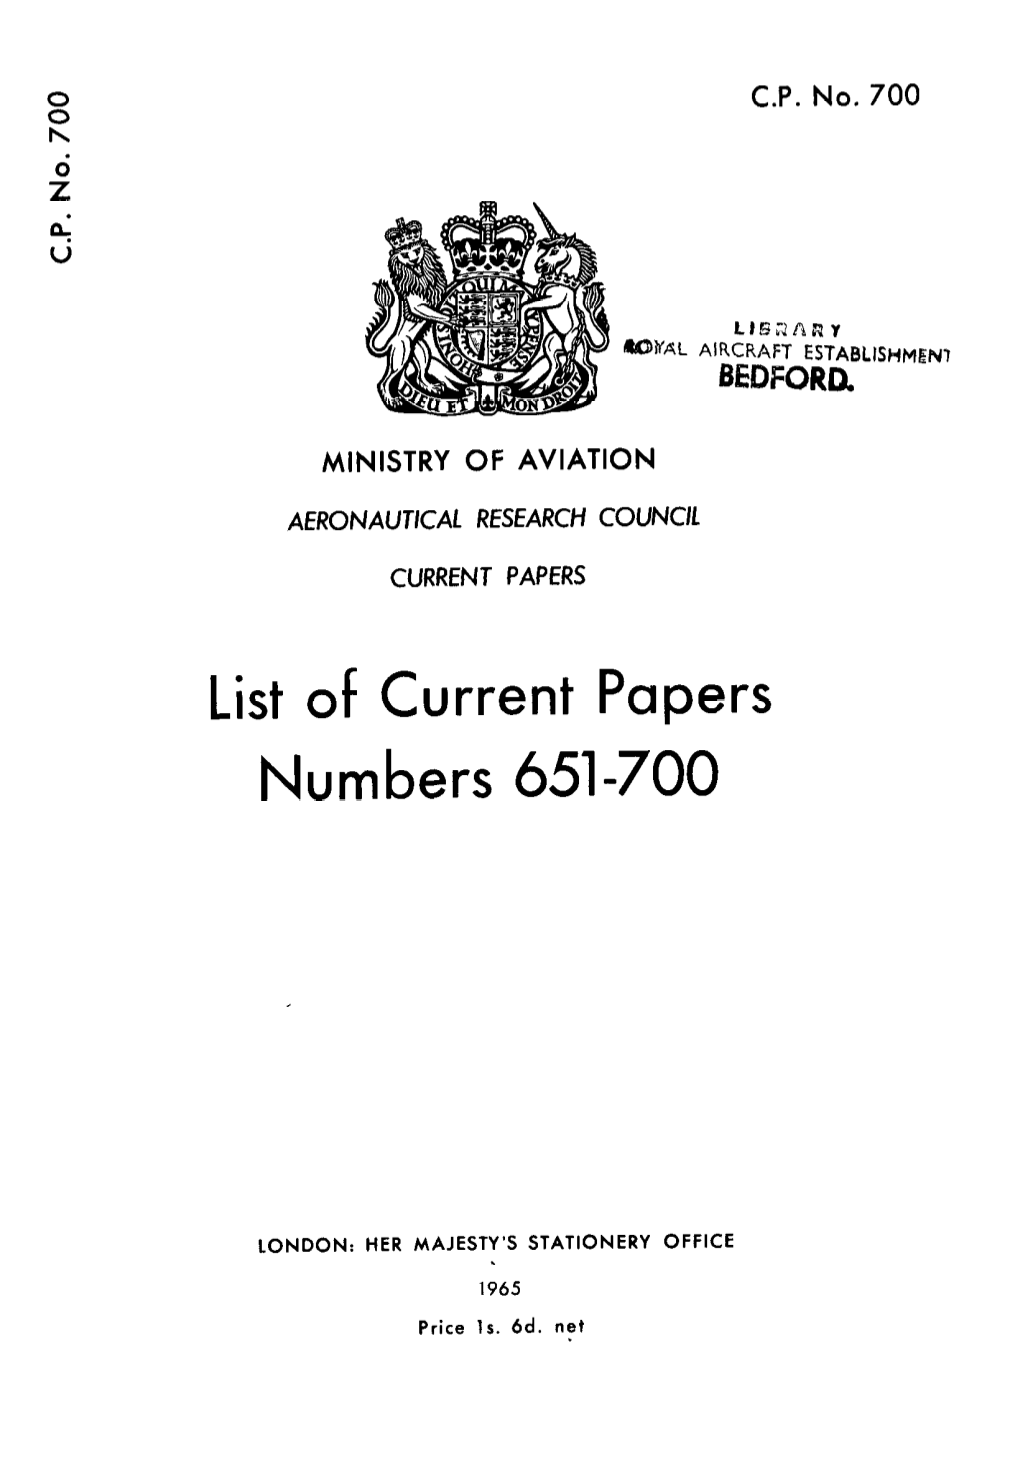 List of Current Papers Numbers 651-700